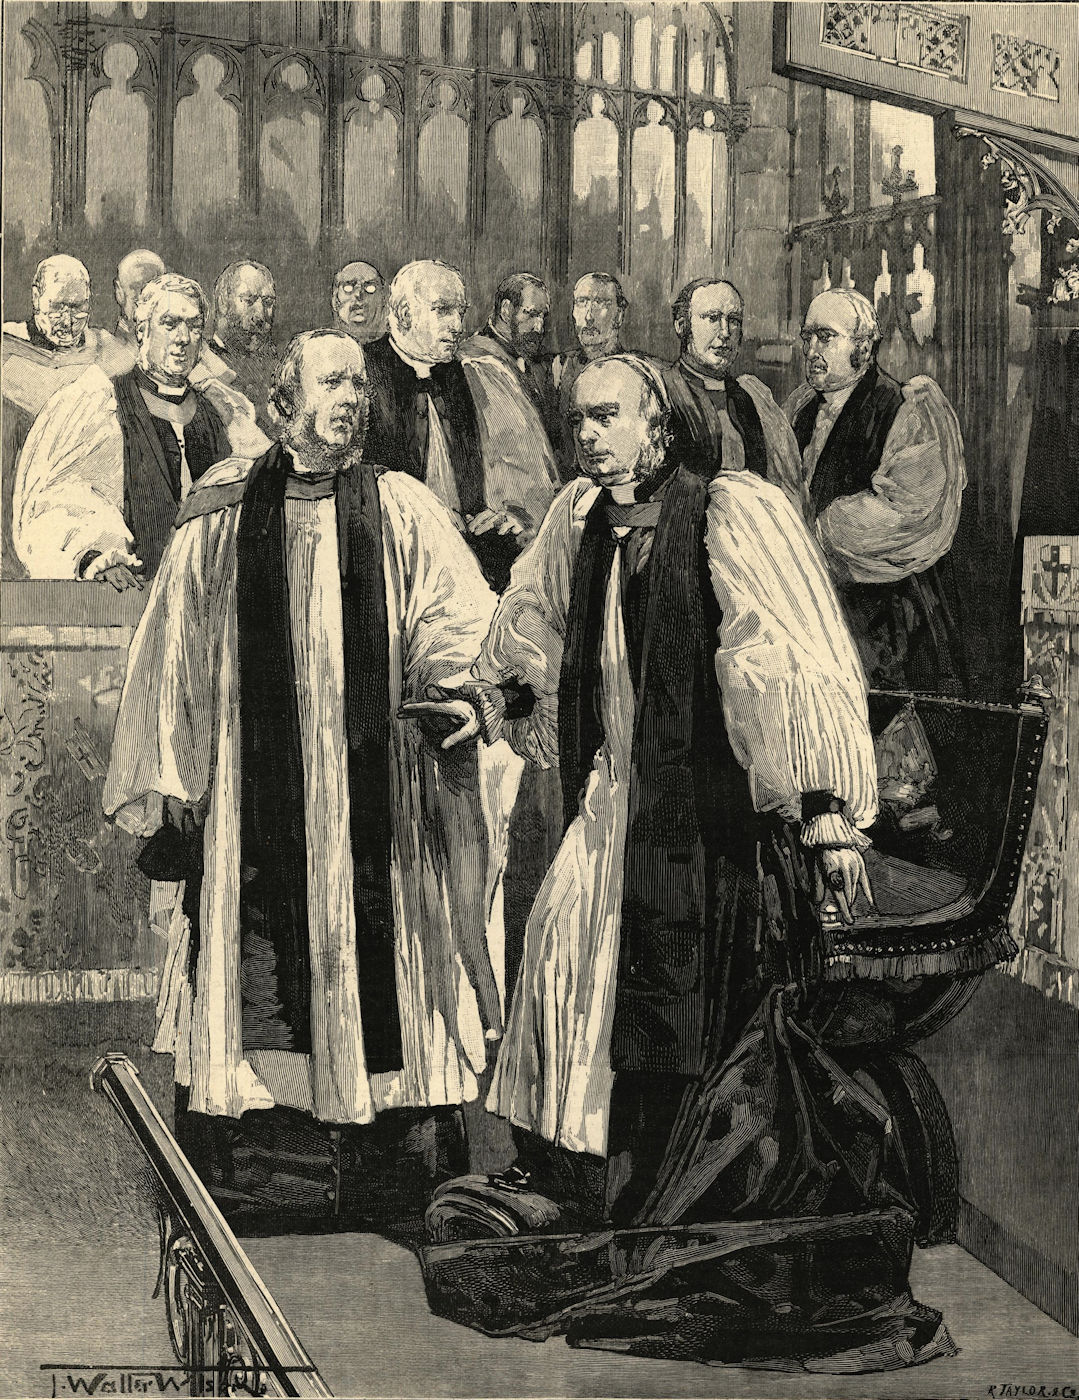 Installation of the Archbishop of York in York Minster. The Dean 1891